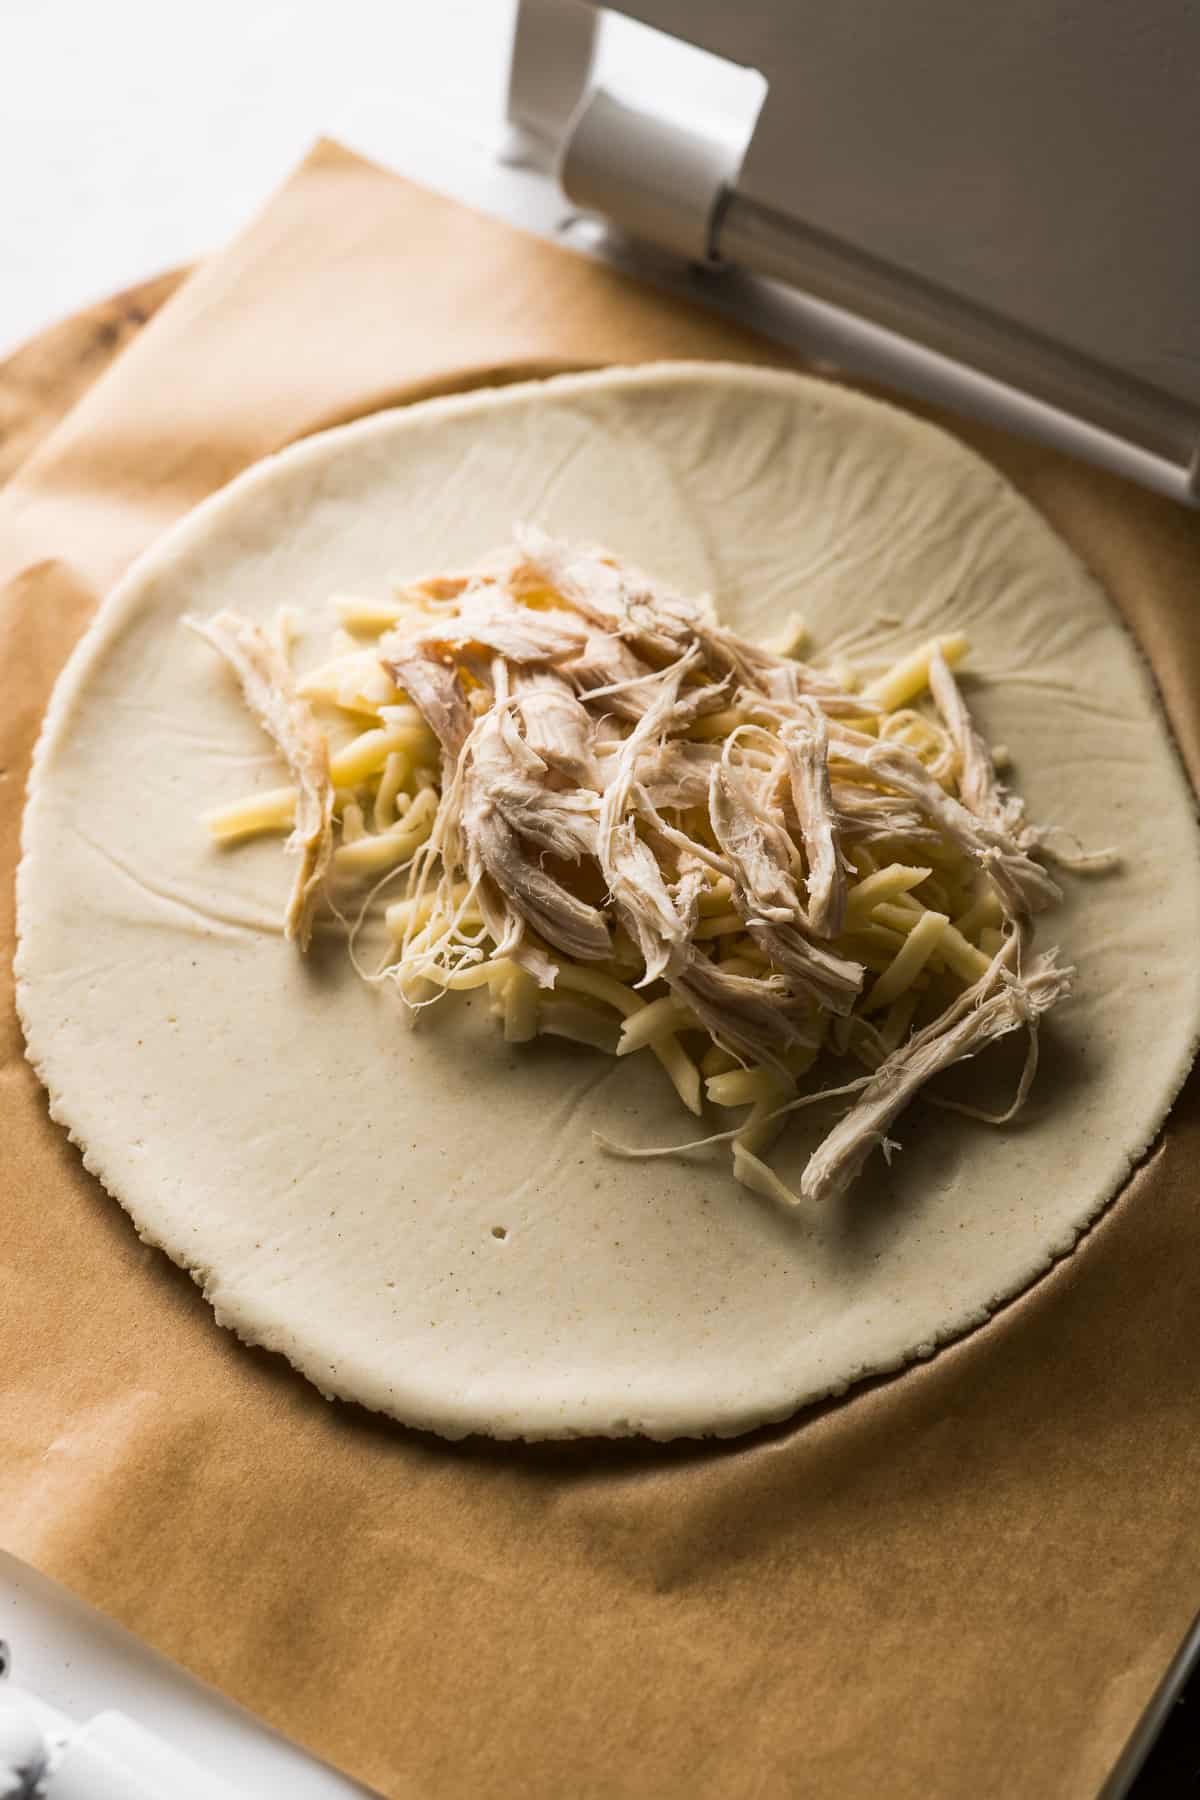 Shredded chicken and cheese in the middle of a circle of masa.